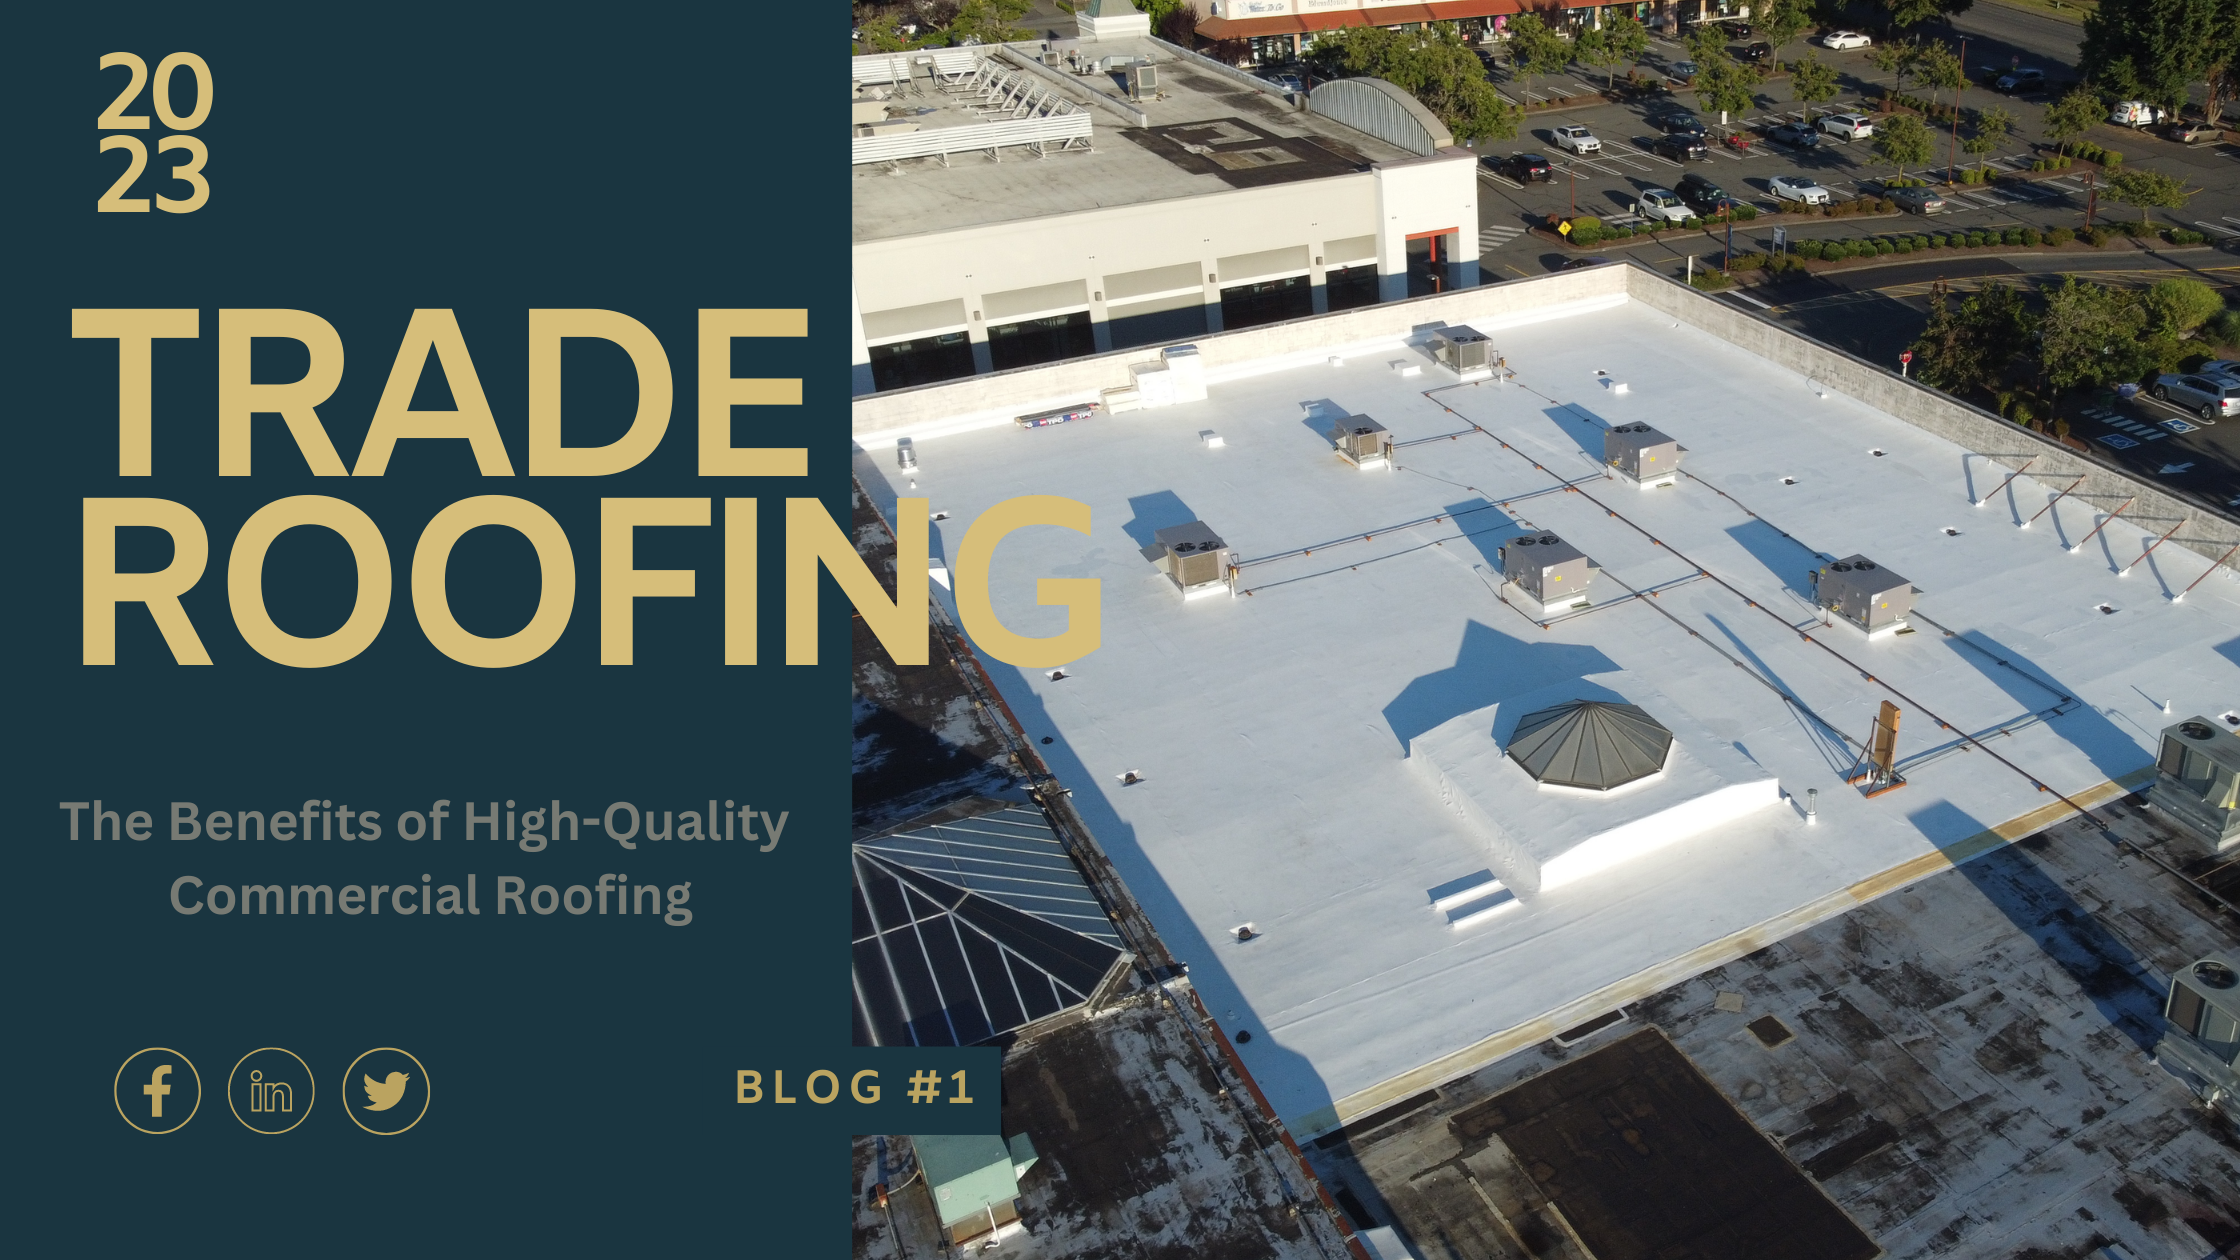 Tade Roofing Blogs